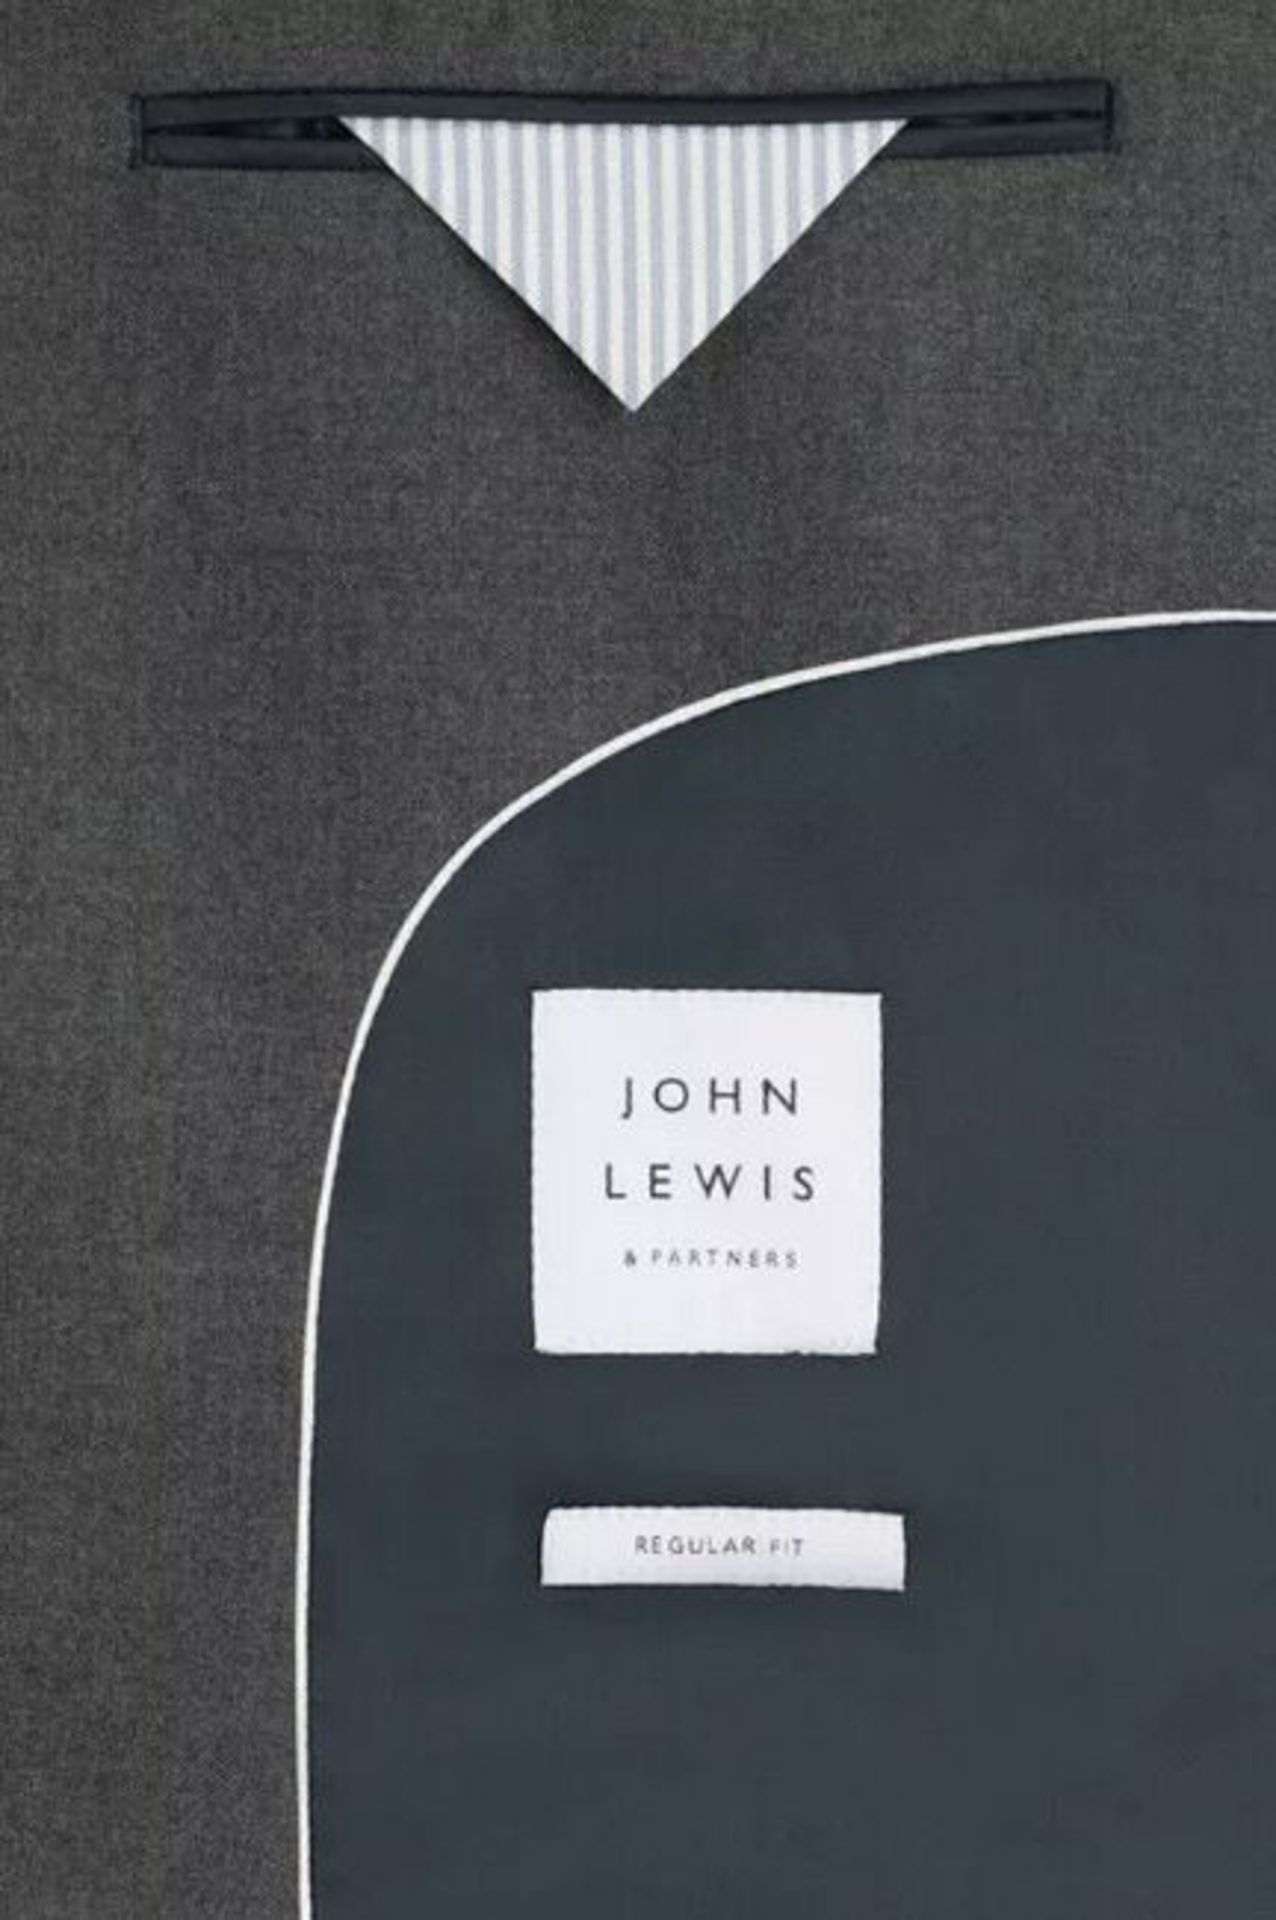 John Lewis Wool Flannel Regular Fit Suit Jacket, Charcoal Size 40R | RRP £170 - Image 5 of 6